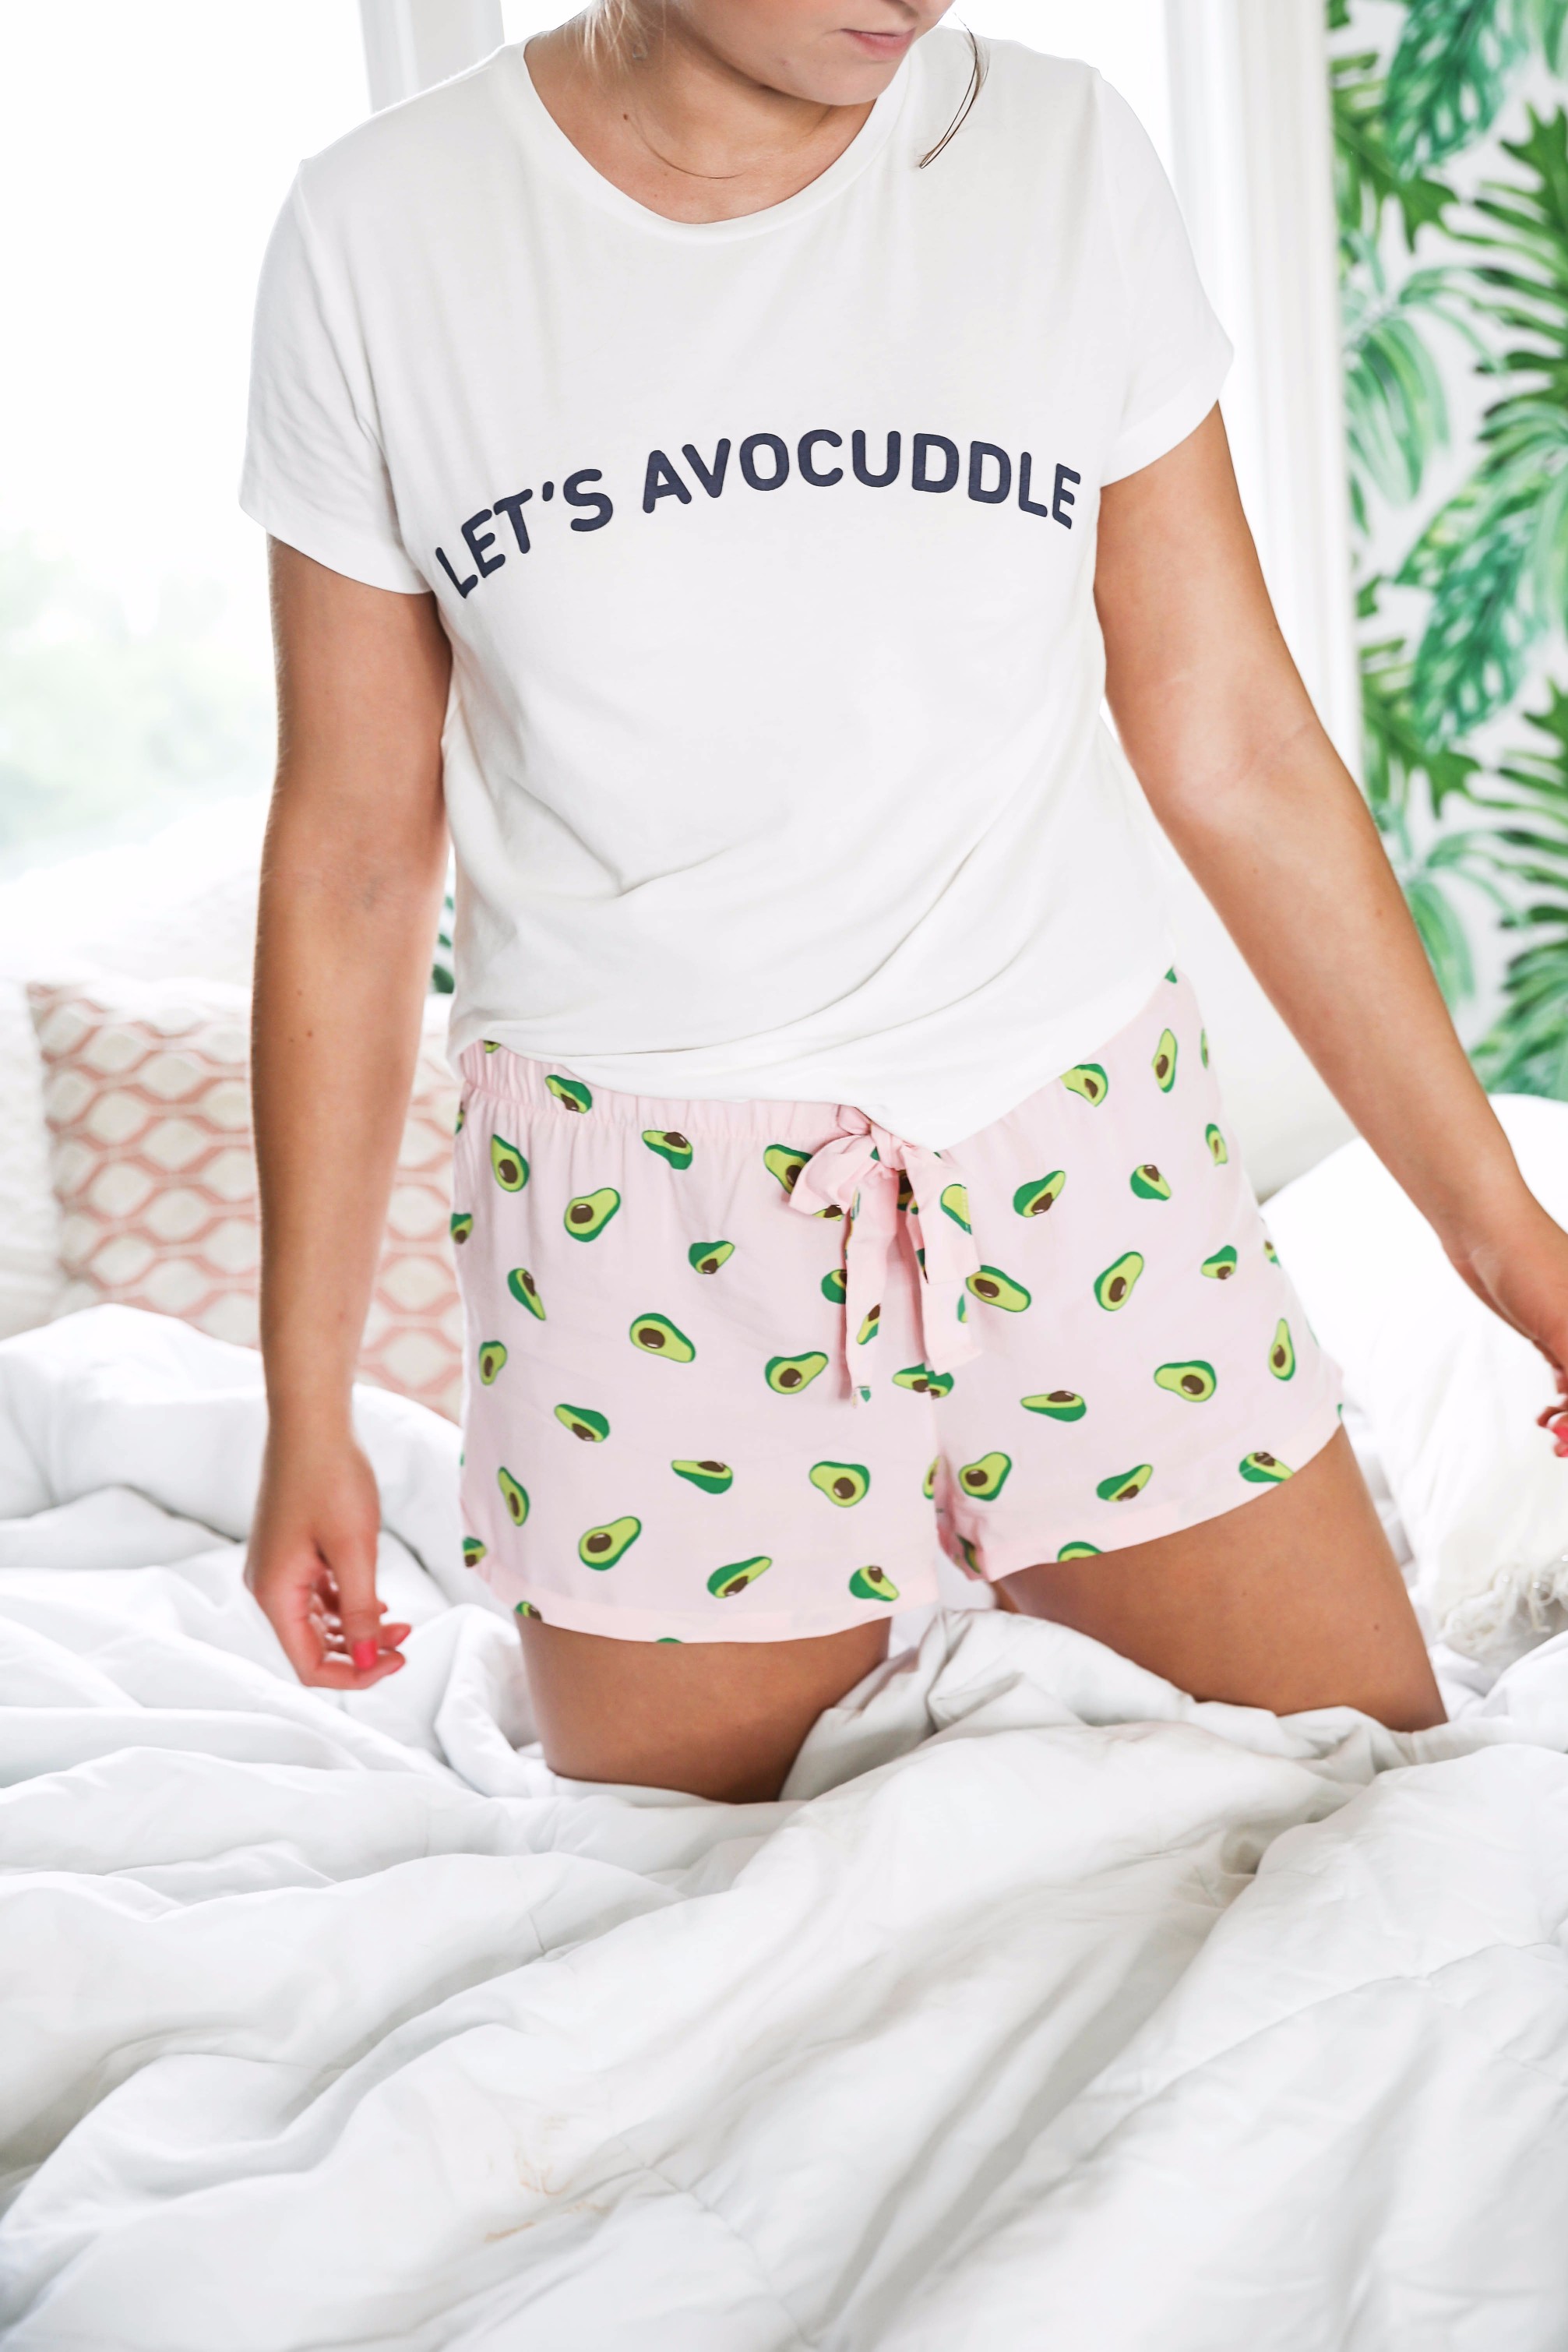 Let's Avo-Cuddle  Pajama OOTD  daily dose of charm